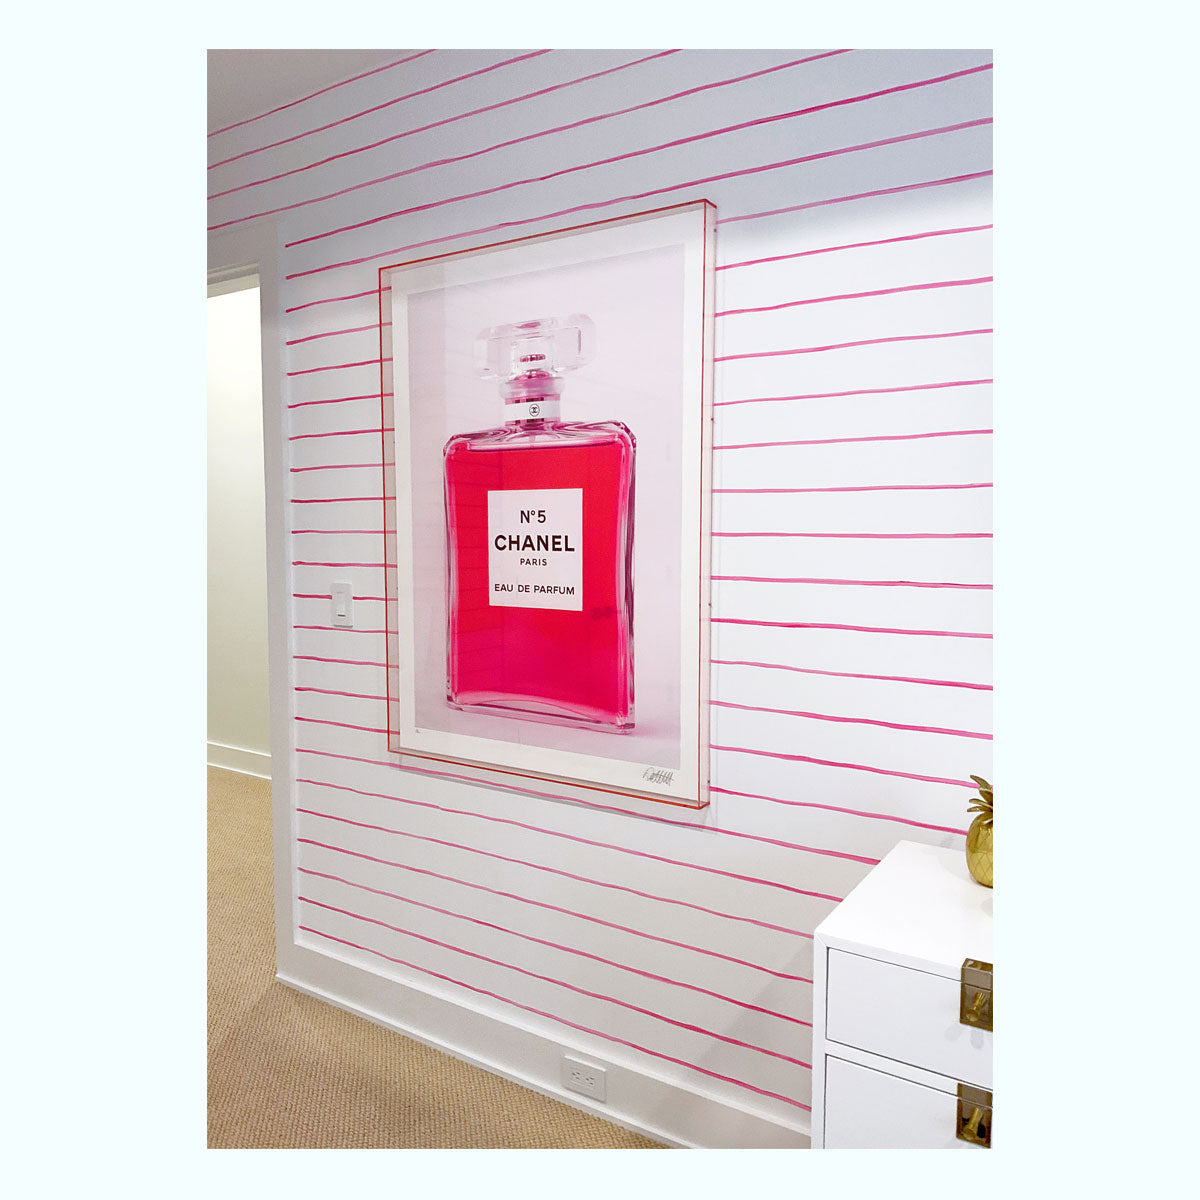 I Only Wear Chanel No.5 (Pink) Art Print